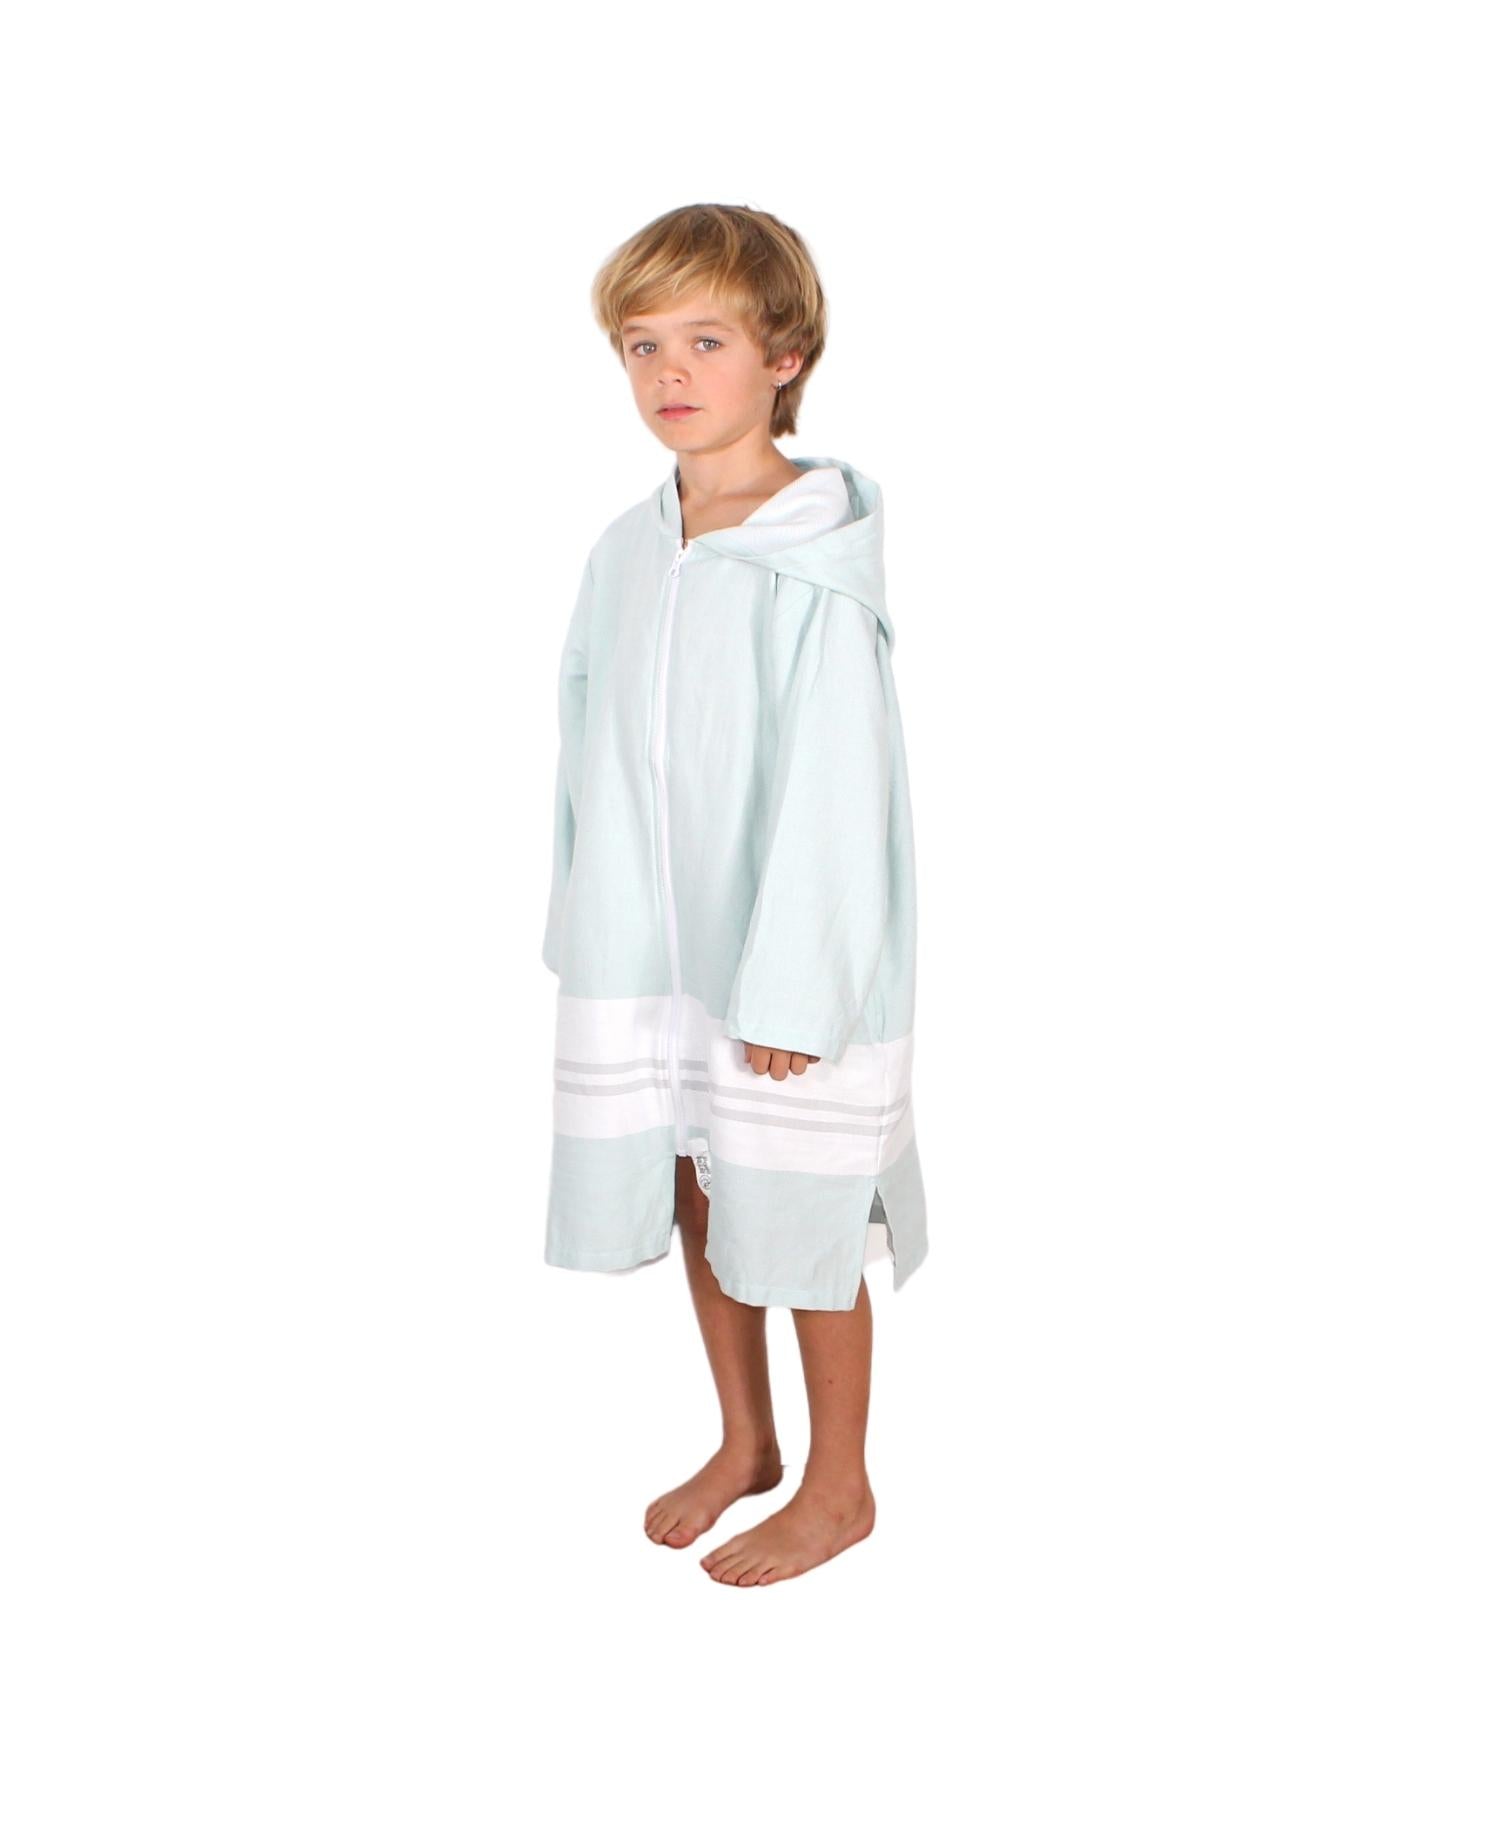 RETRO GROOVE YOUTH TOWEL PONCHO - HOODED TOWEL